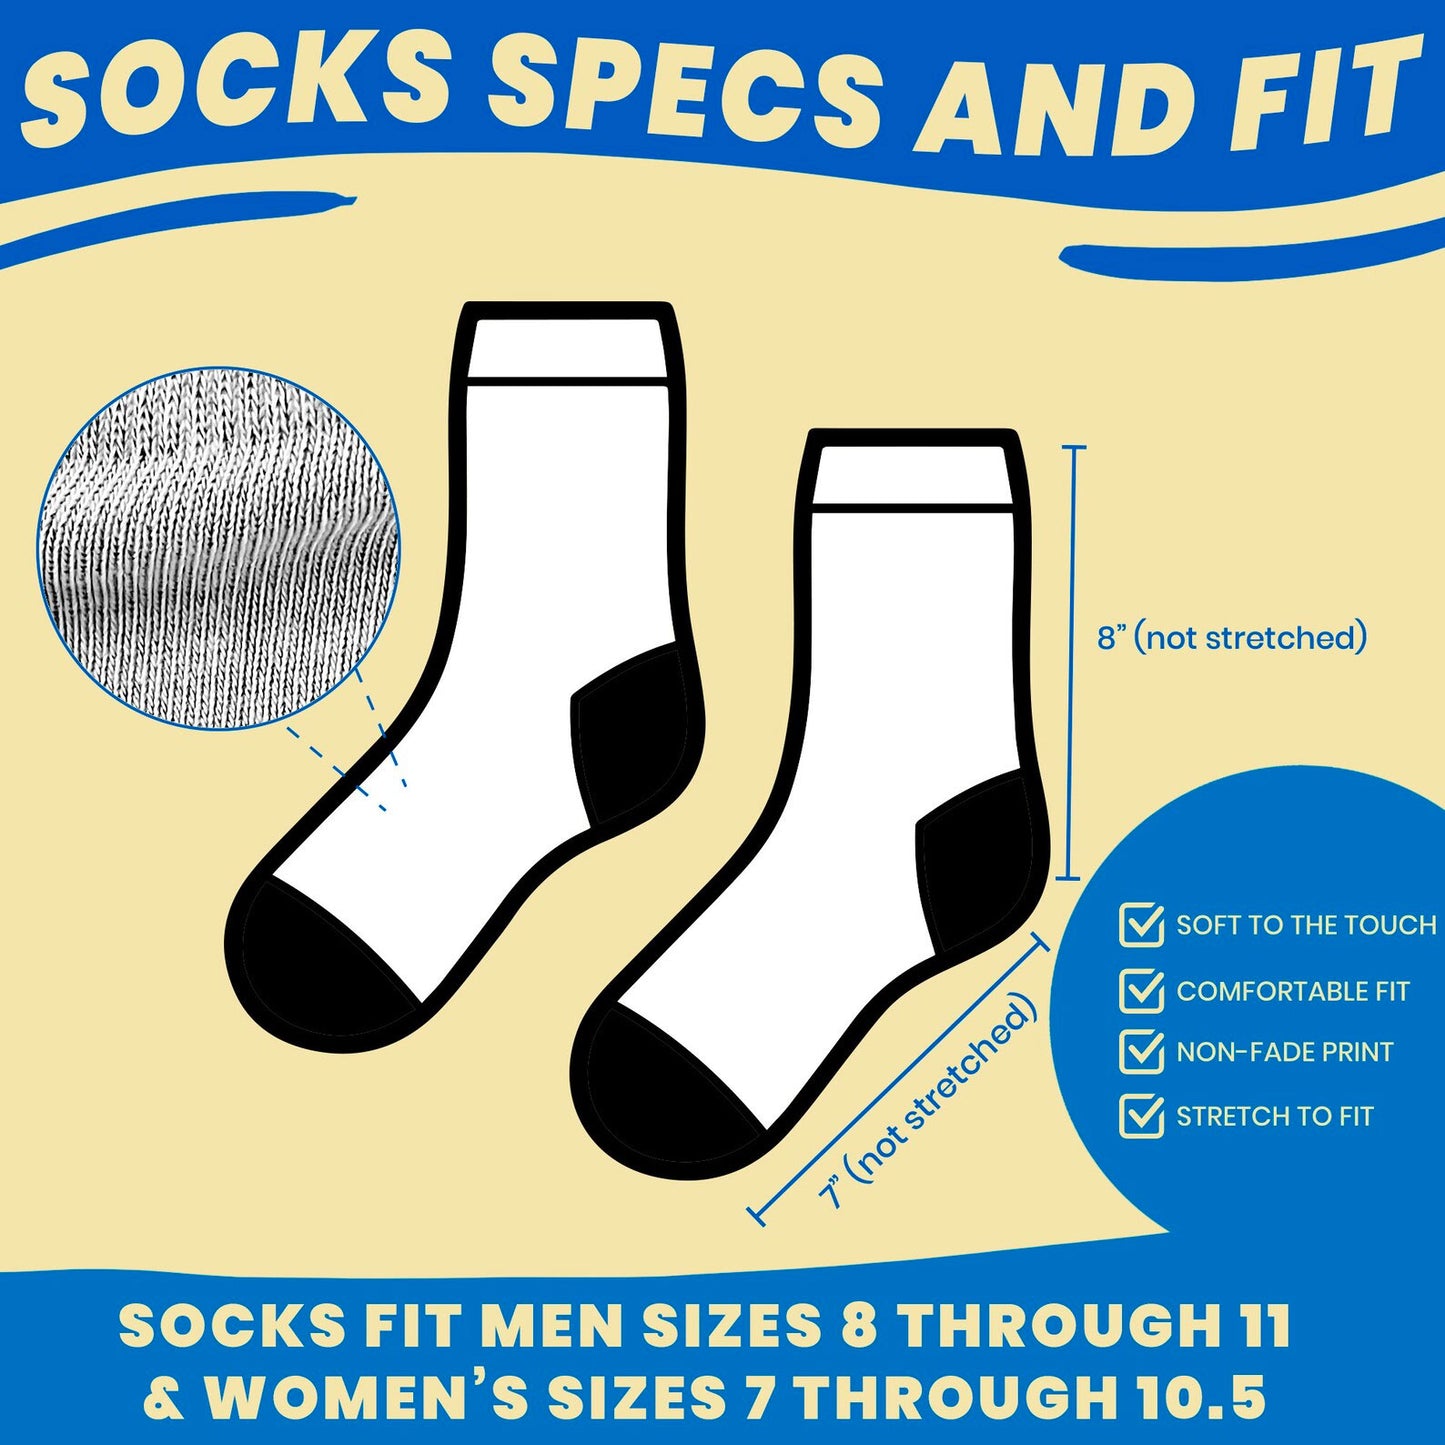 personalized runner gifts socks with faces socks specs